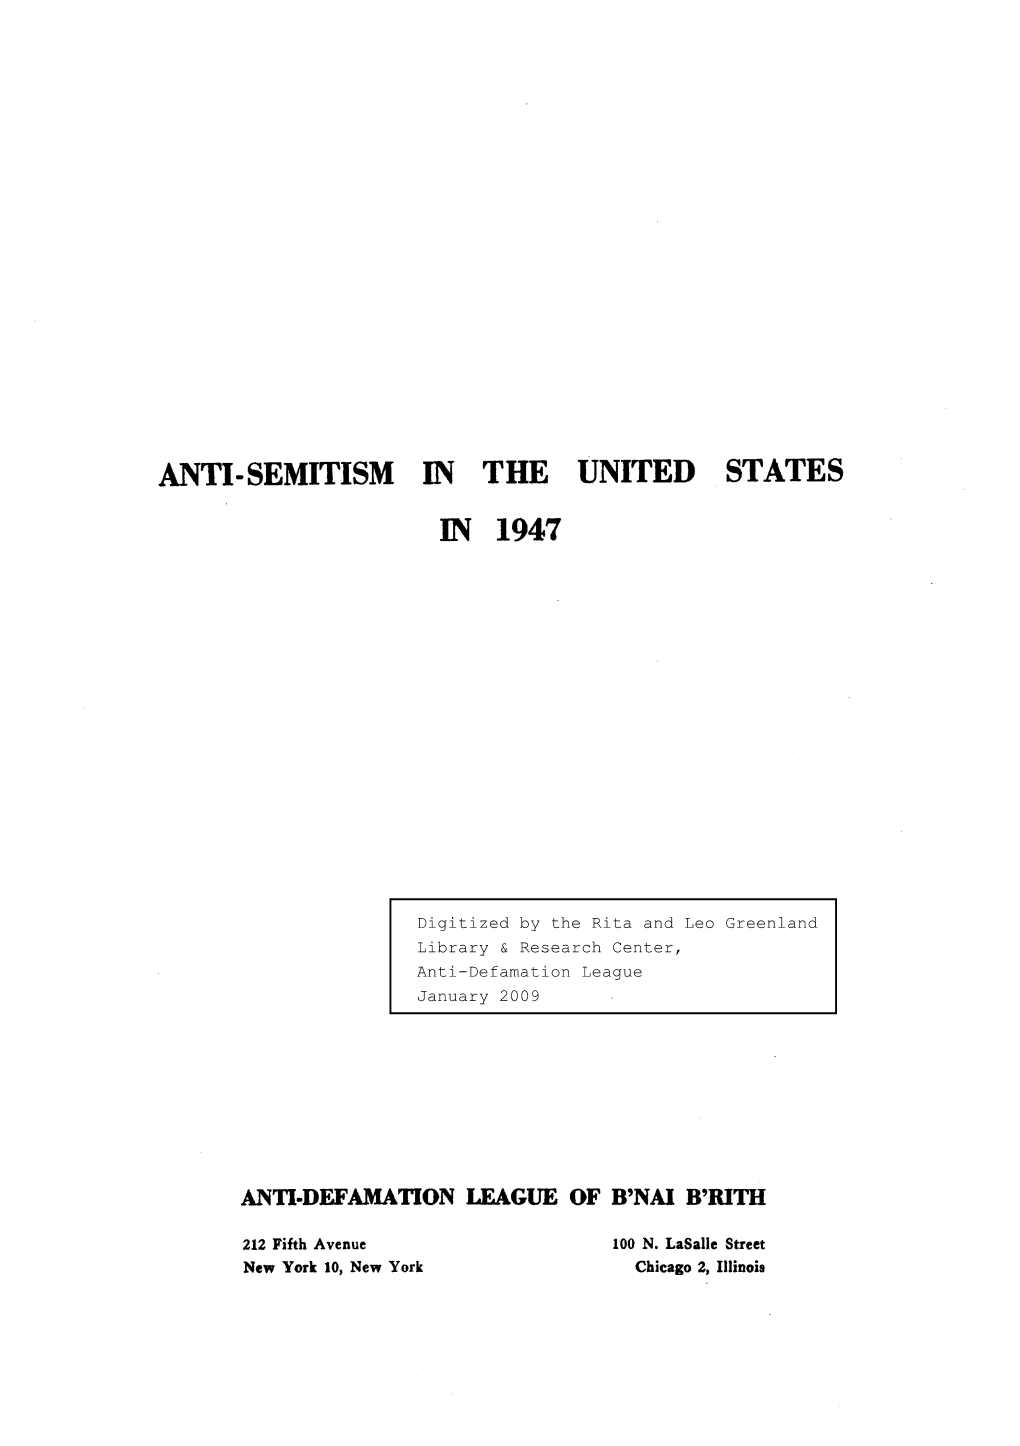 Anti-Semitism in the United States in 1947